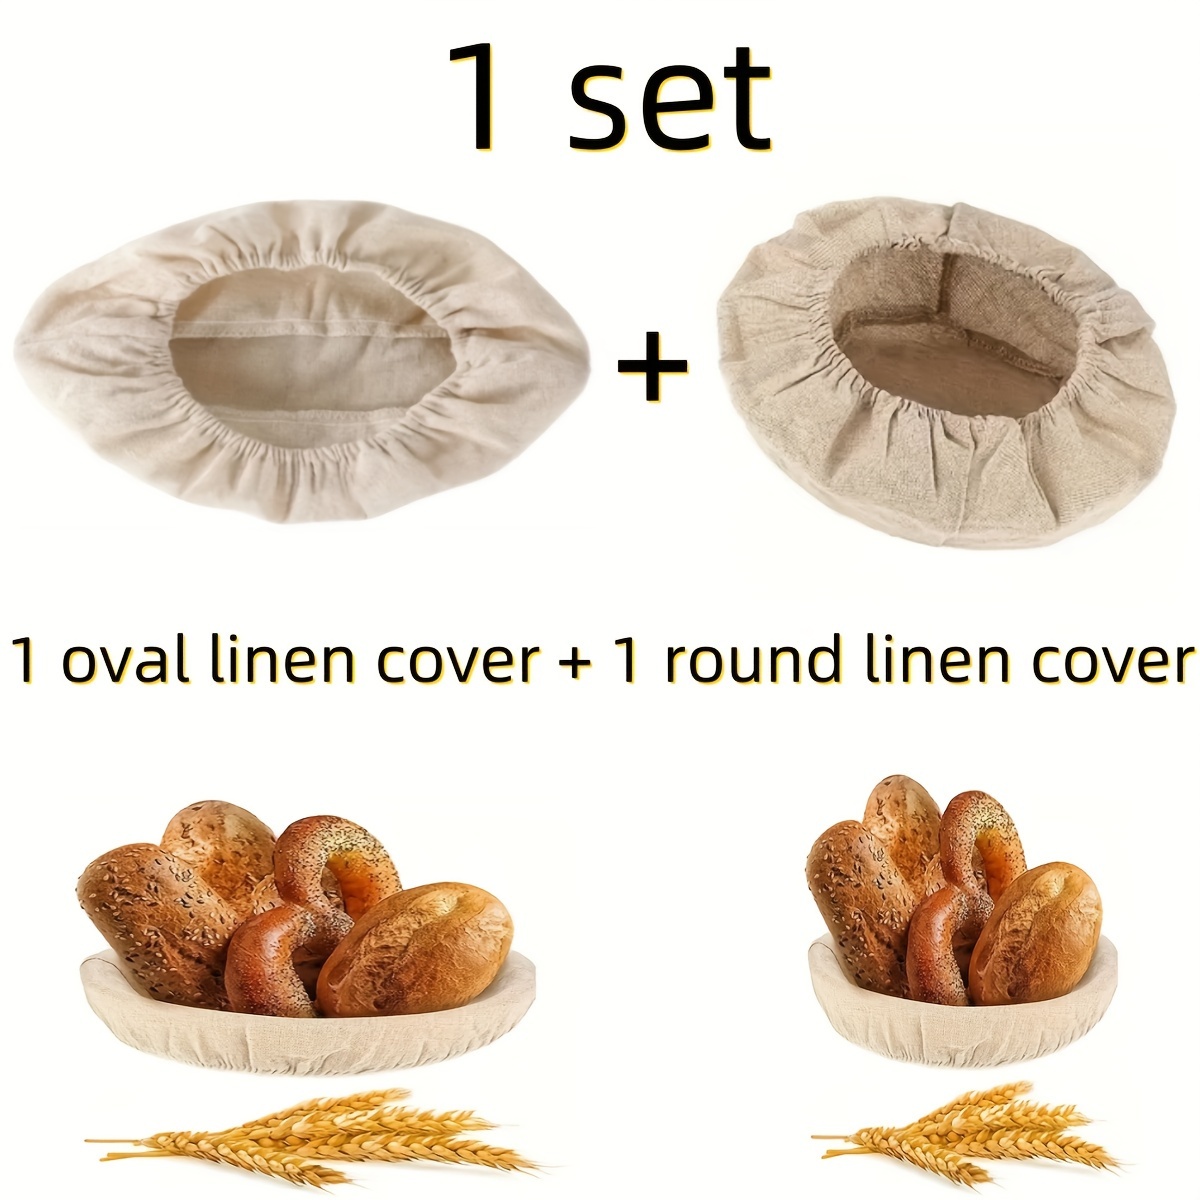 

1 Set, 1 Piece Oval And 1 Piece Round Bread Basket Cloth Cover For Restaurant/bakery/home - Lined, Perfect For Bread Fermentation.